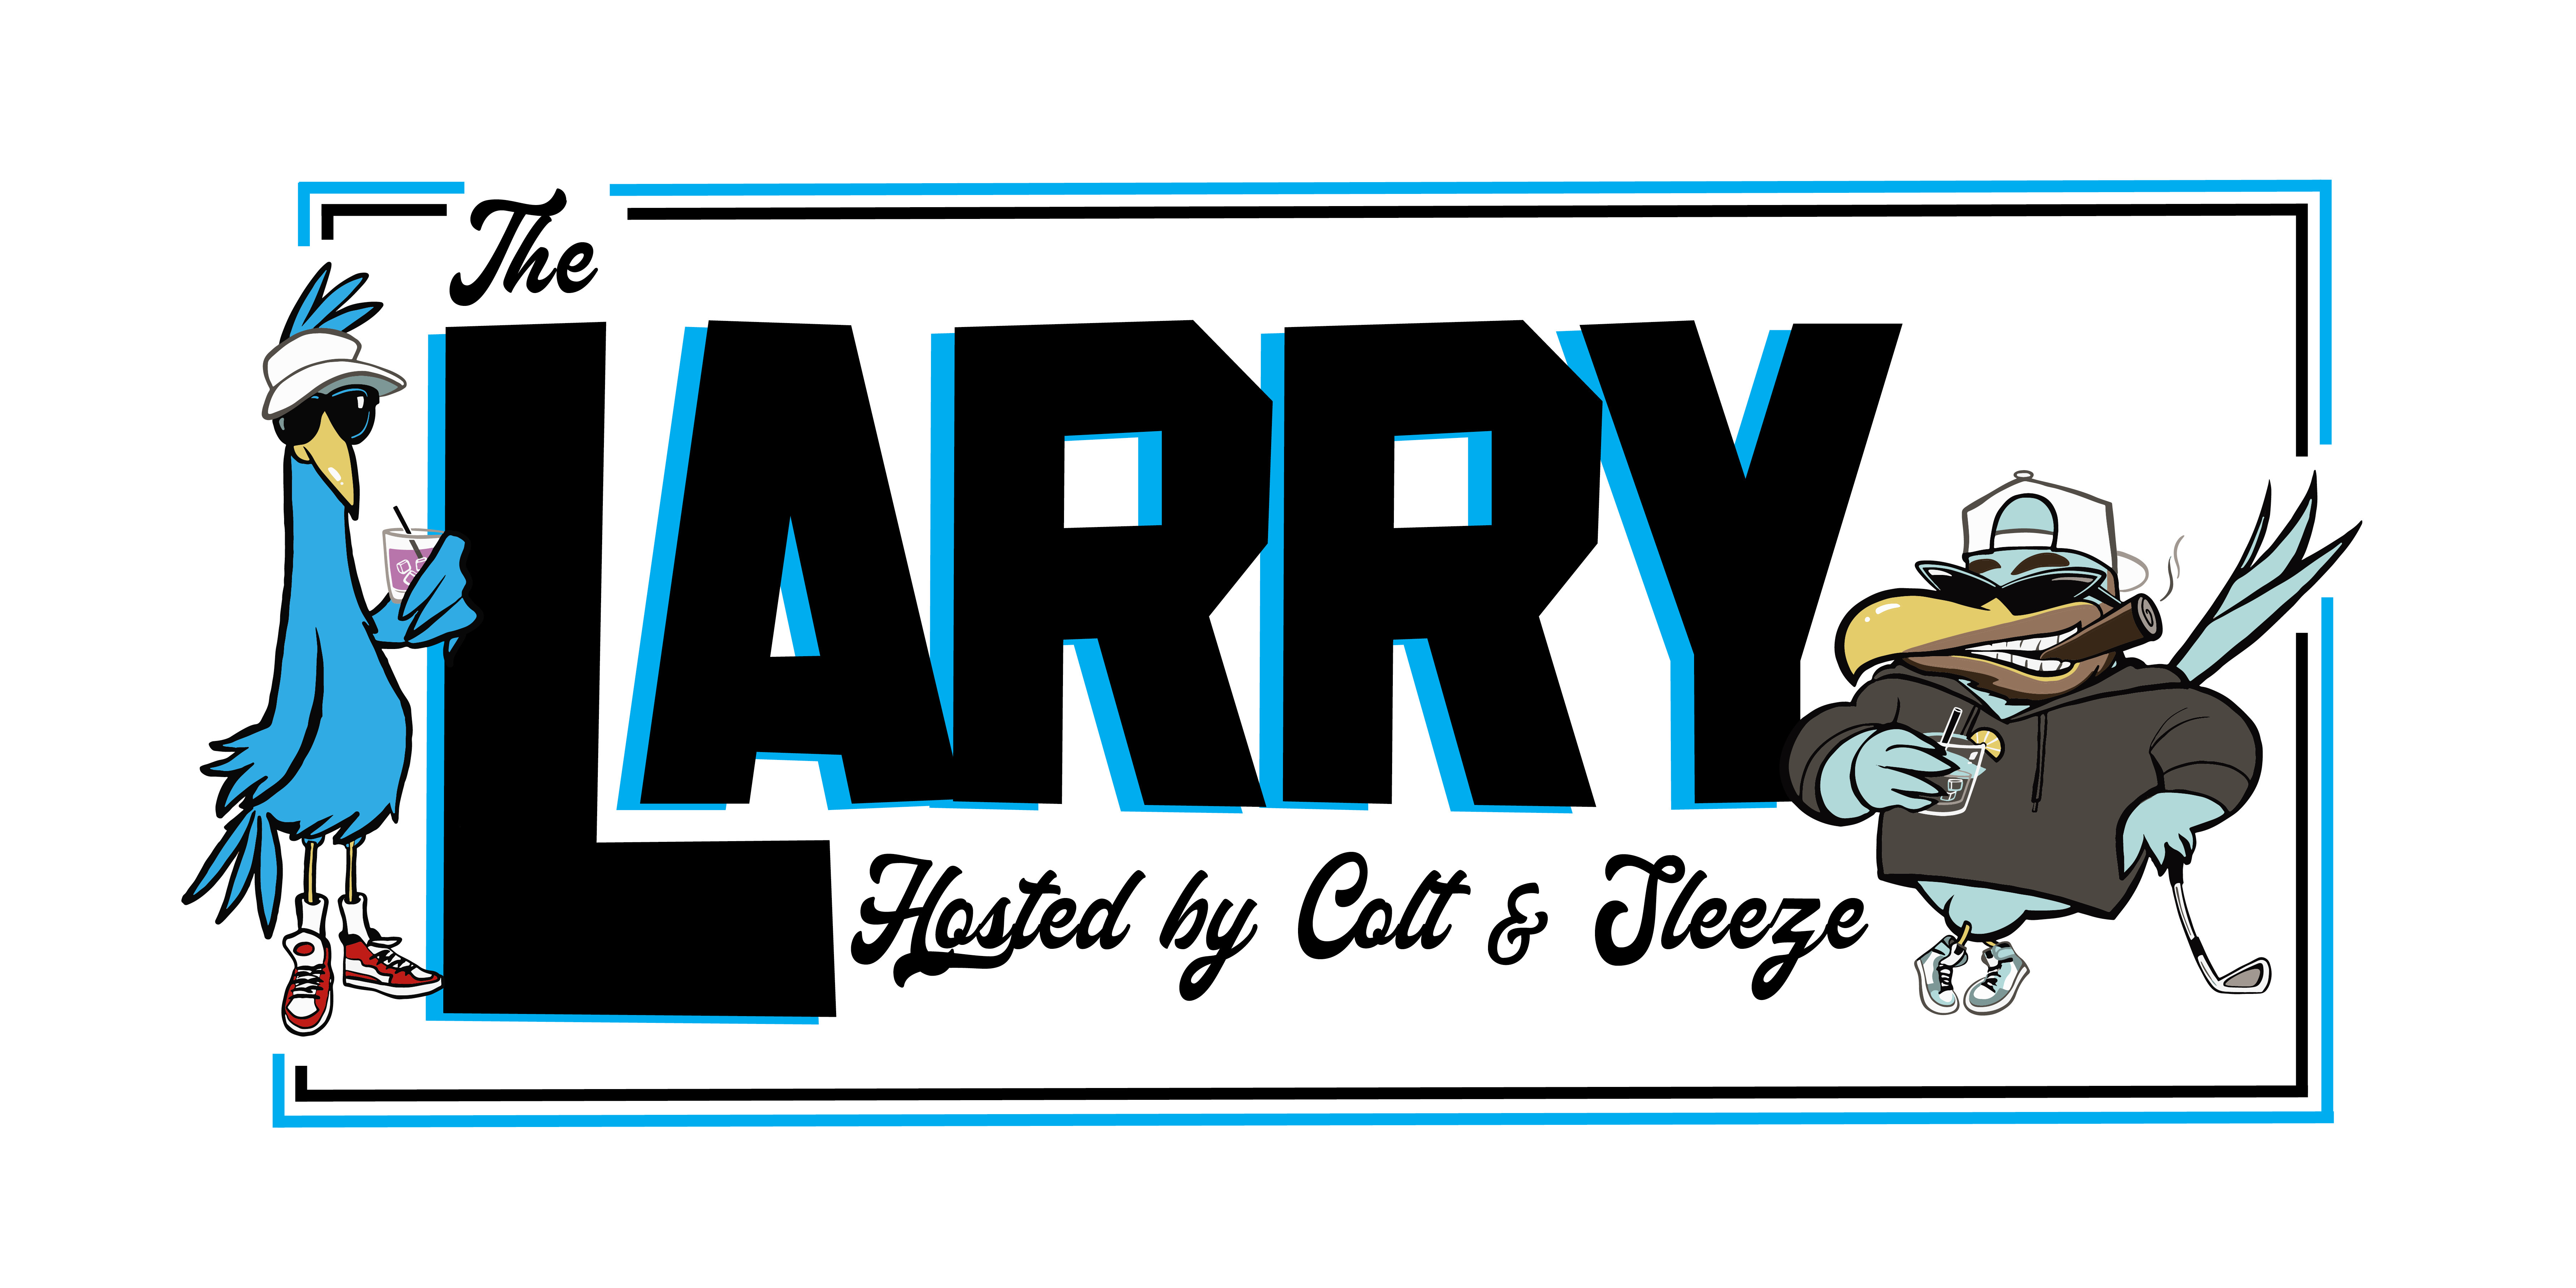 Registration for The Larry hosted by Subpar's Colt and Drew is now open!